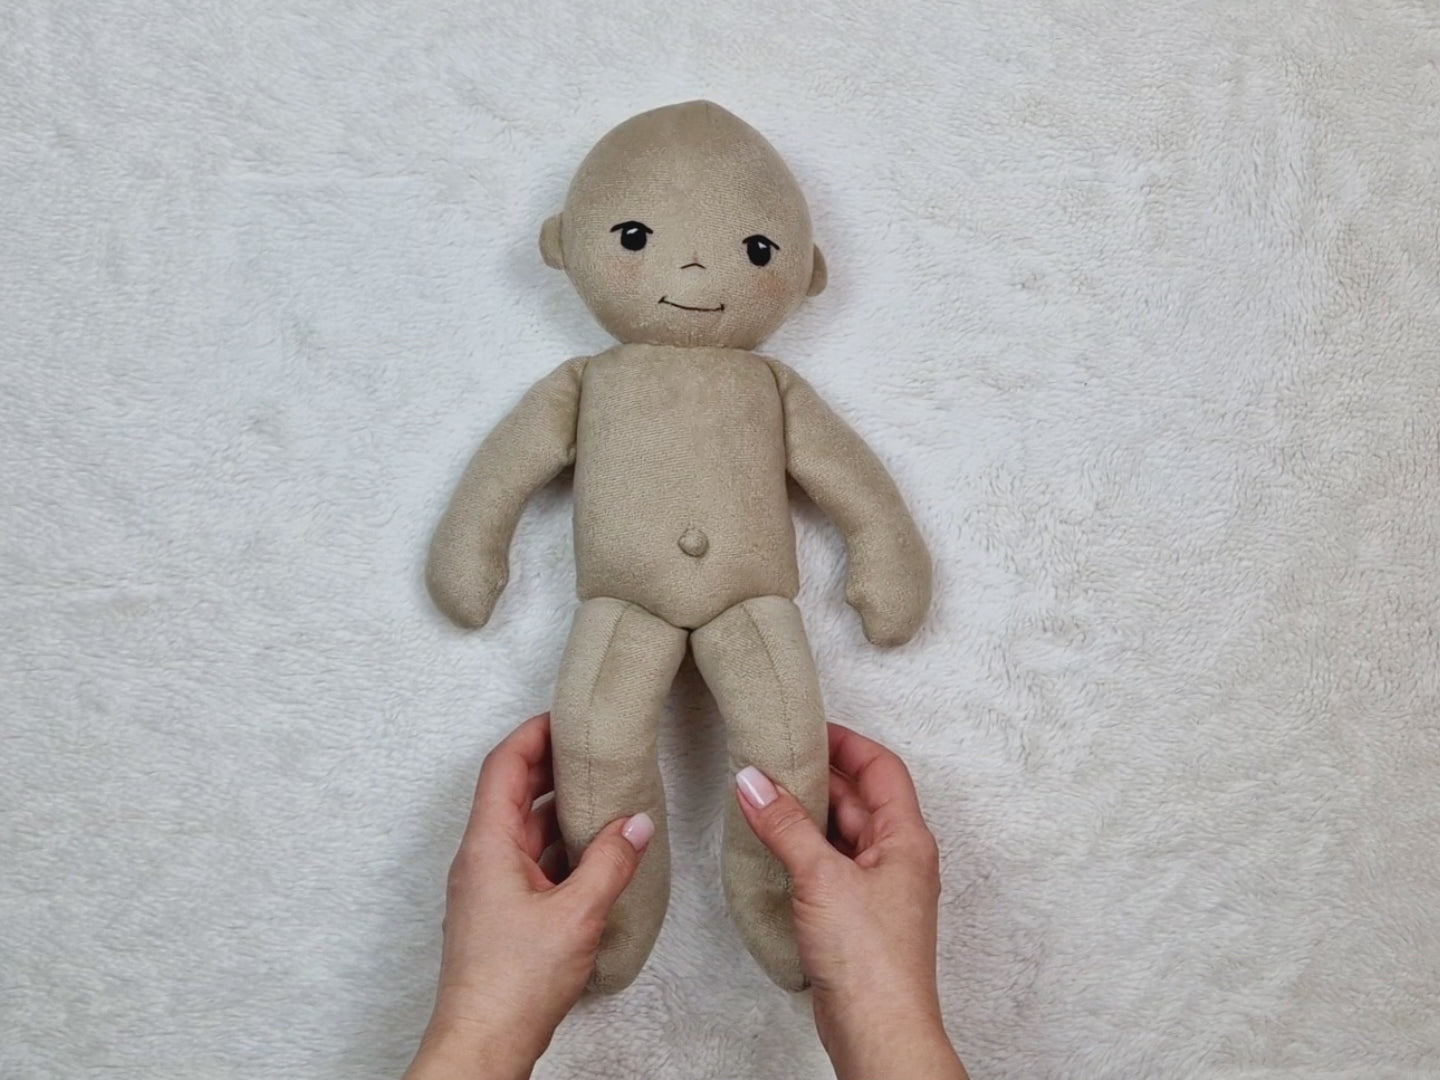 Baby Doll 15 inch - sewing step by step pattern and tutorial for doll and accessories